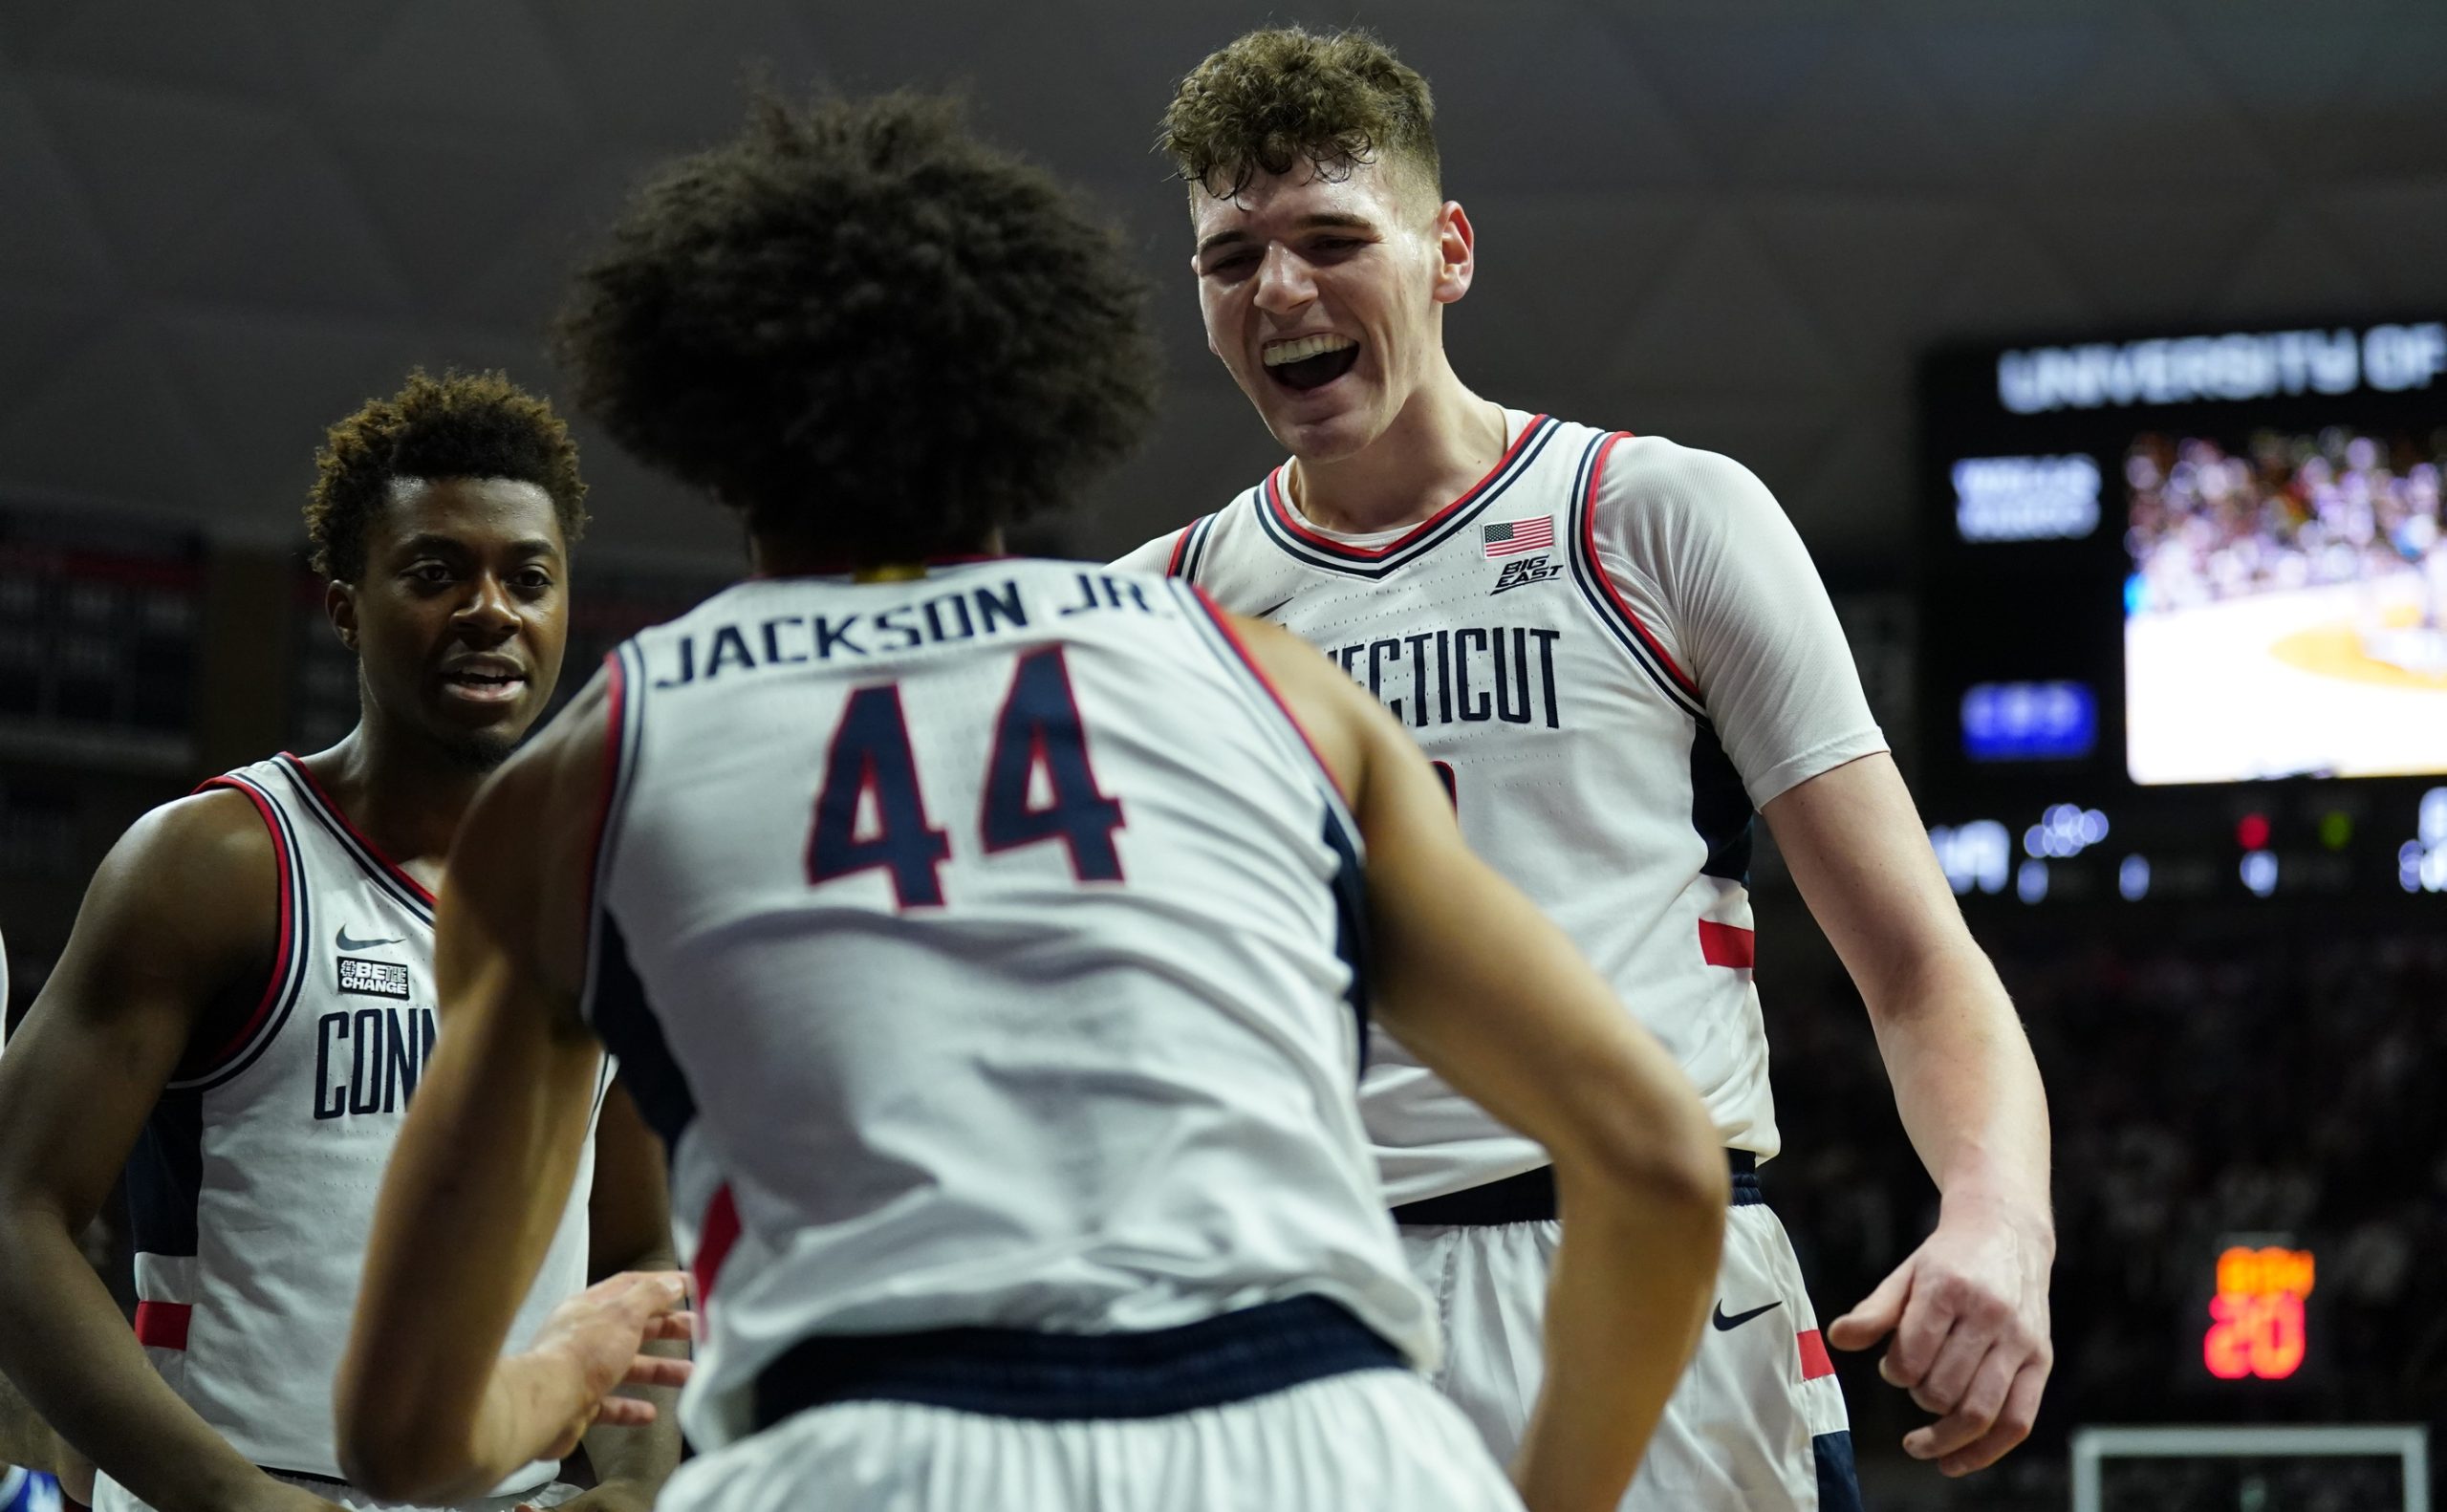 Feb 18, 2023; Storrs, Connecticut, USA; UConn Huskies center Donovan Clingan (32) reacts with guard Andre Jackson Jr. (44) after a play against the Seton Hall Pirates in the second half at Harry A. Gampel Pavilion. Mandatory Credit: David Butler II-USA TODAY Sports